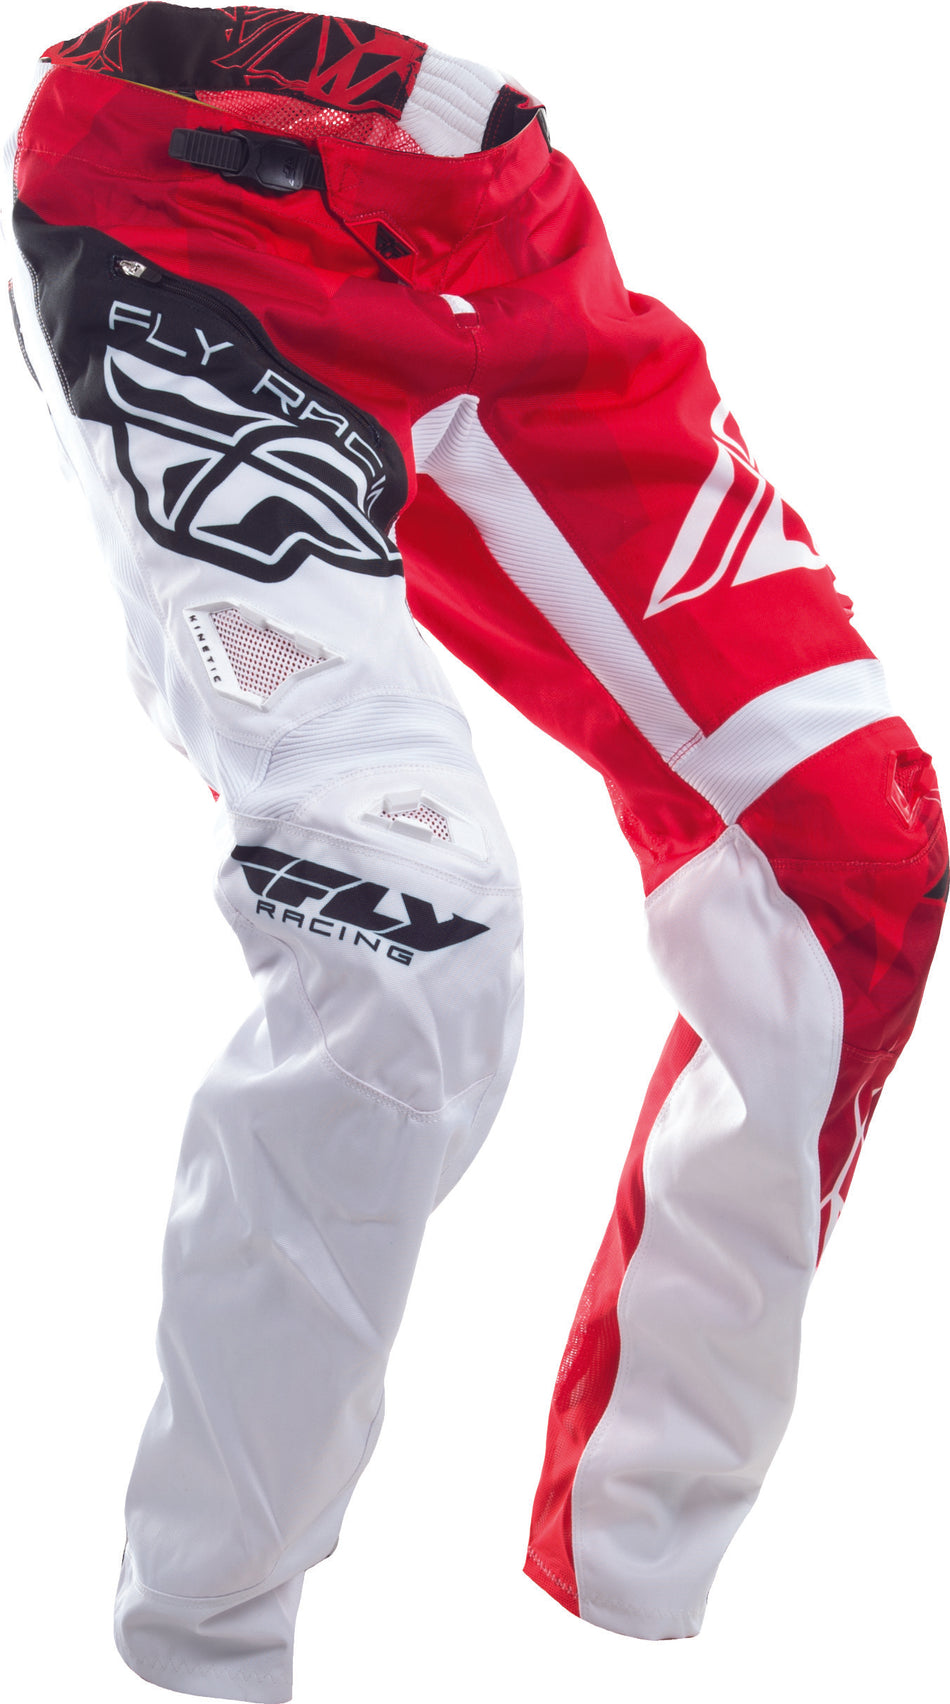 FLY RACING Bicycle Crux Pant Red/White Sz 26 370-02226